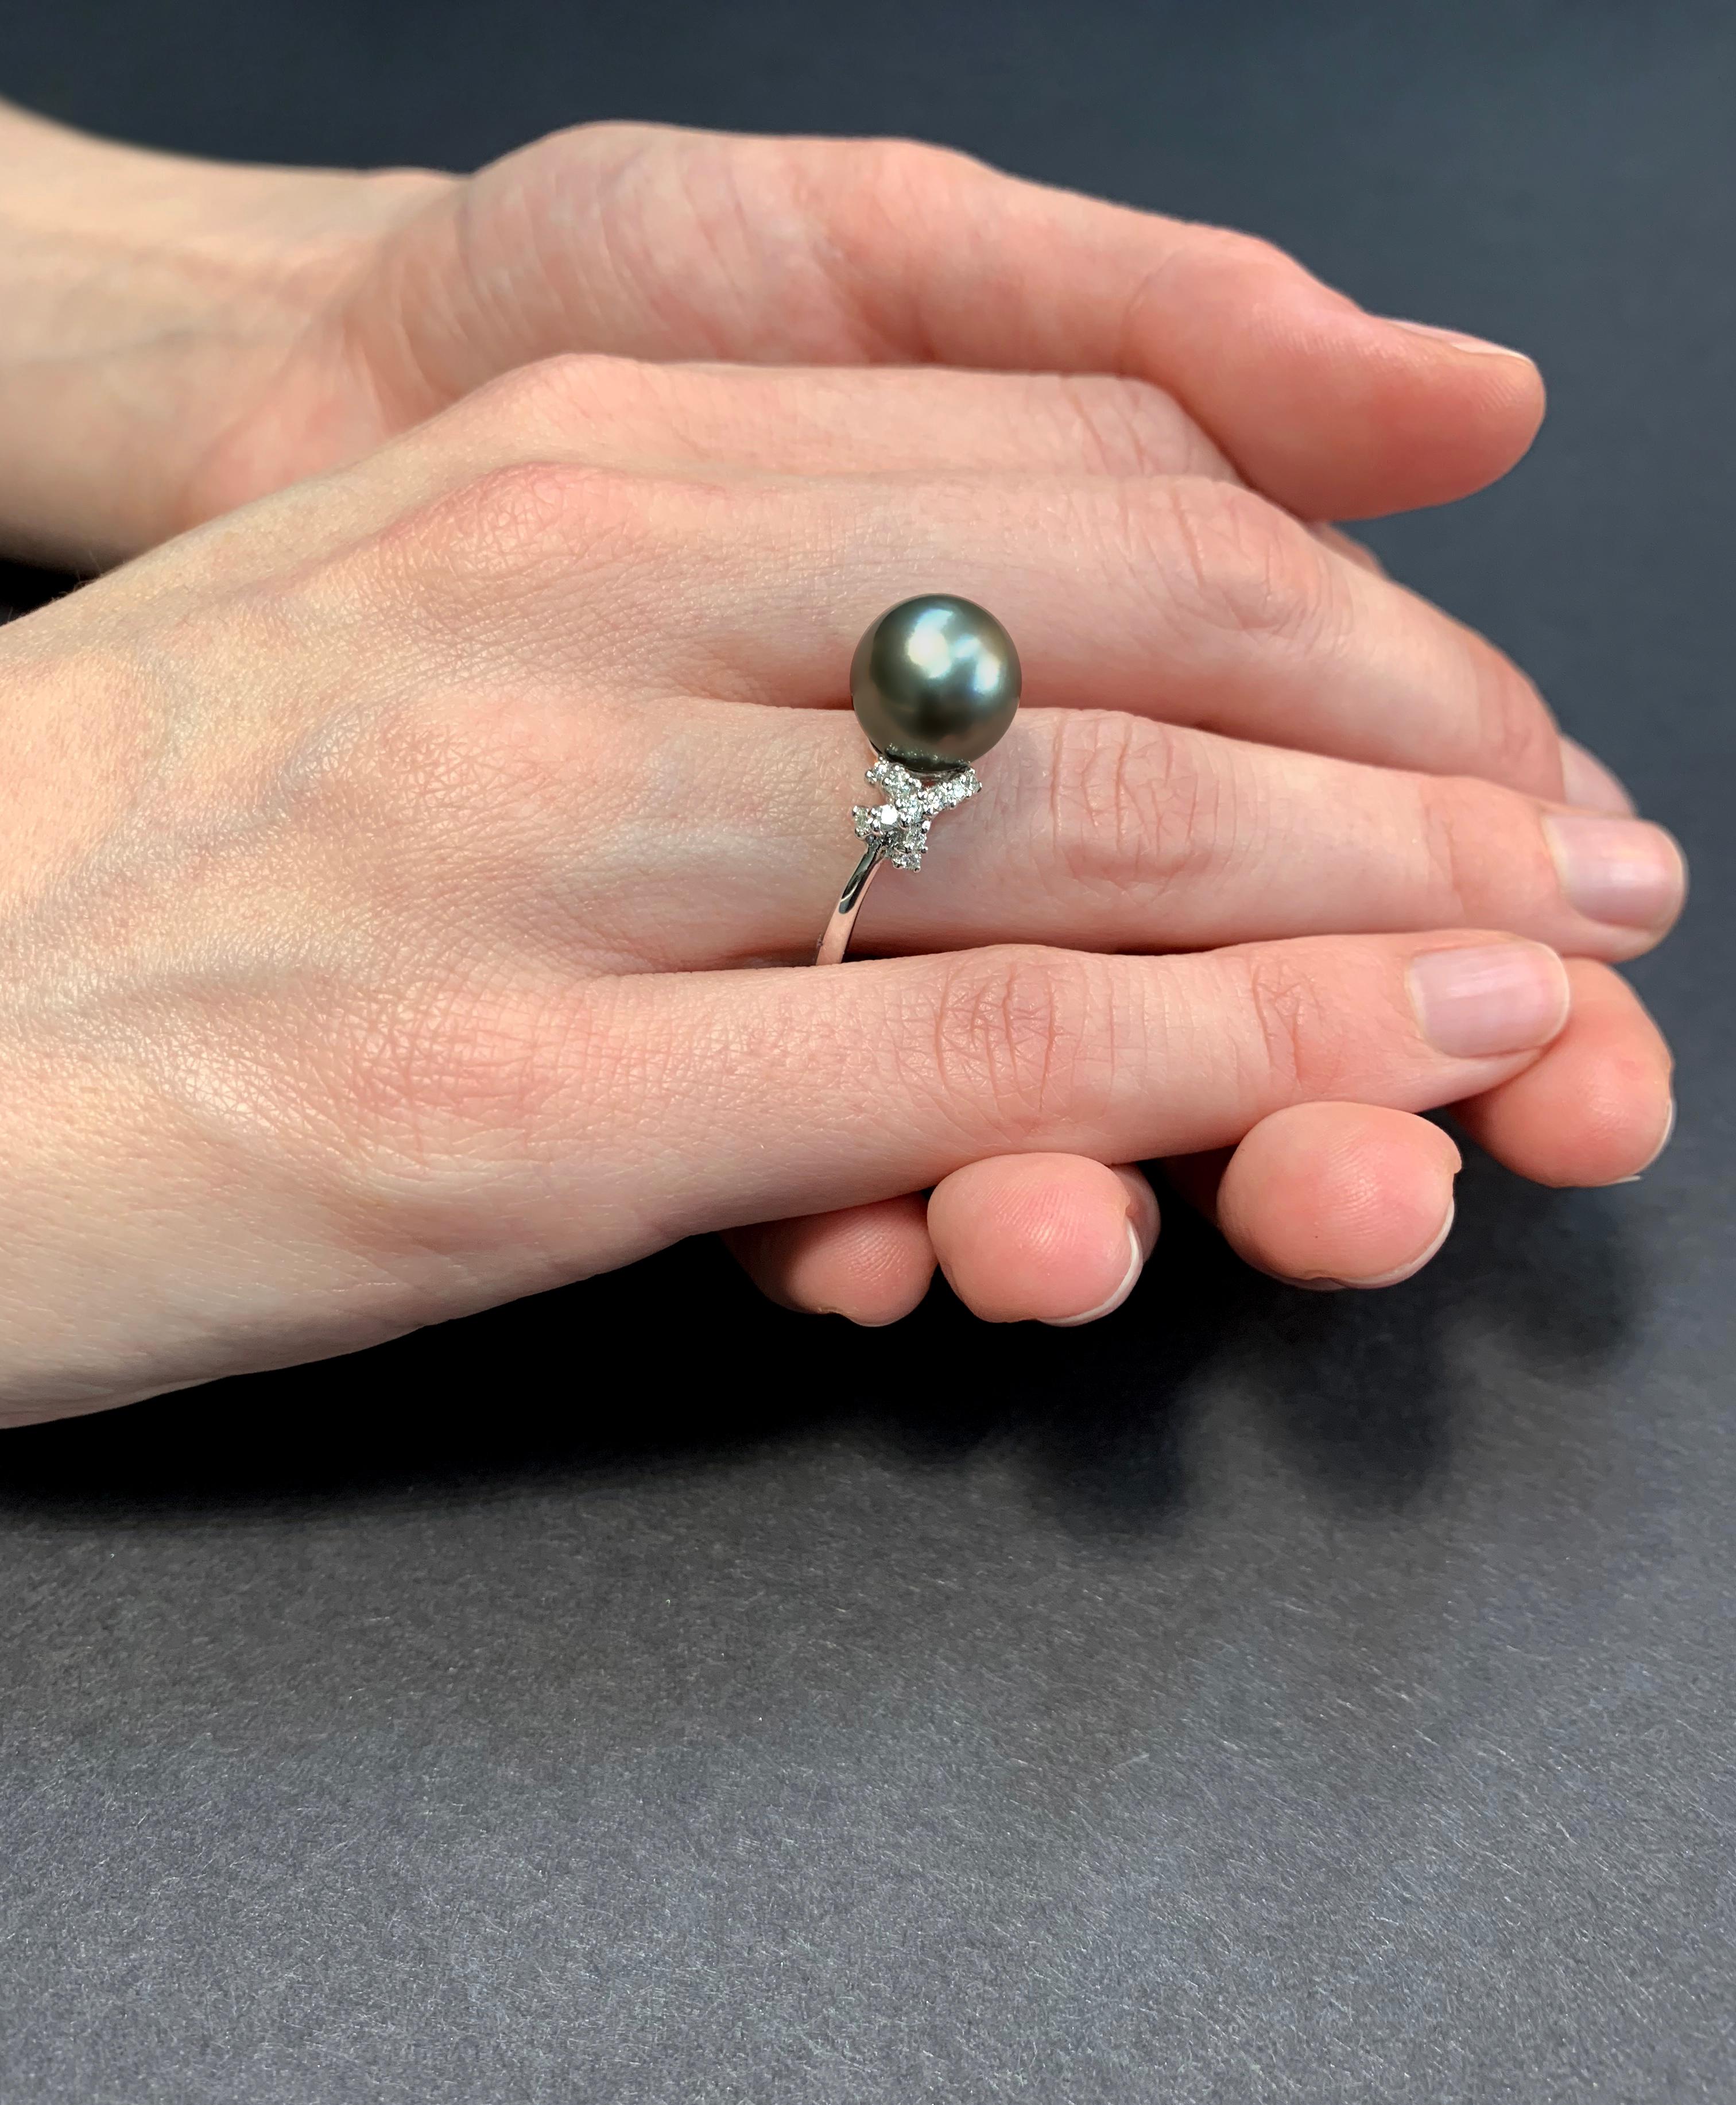 This graceful ring by Yoko London features a lustrous Tahitian pearl set between two diamond ‘kisses’. The 18 Karat white gold setting enriches the cool hues of the Tahitian pearl and the white sparkle of the diamonds. This ring holds romantic